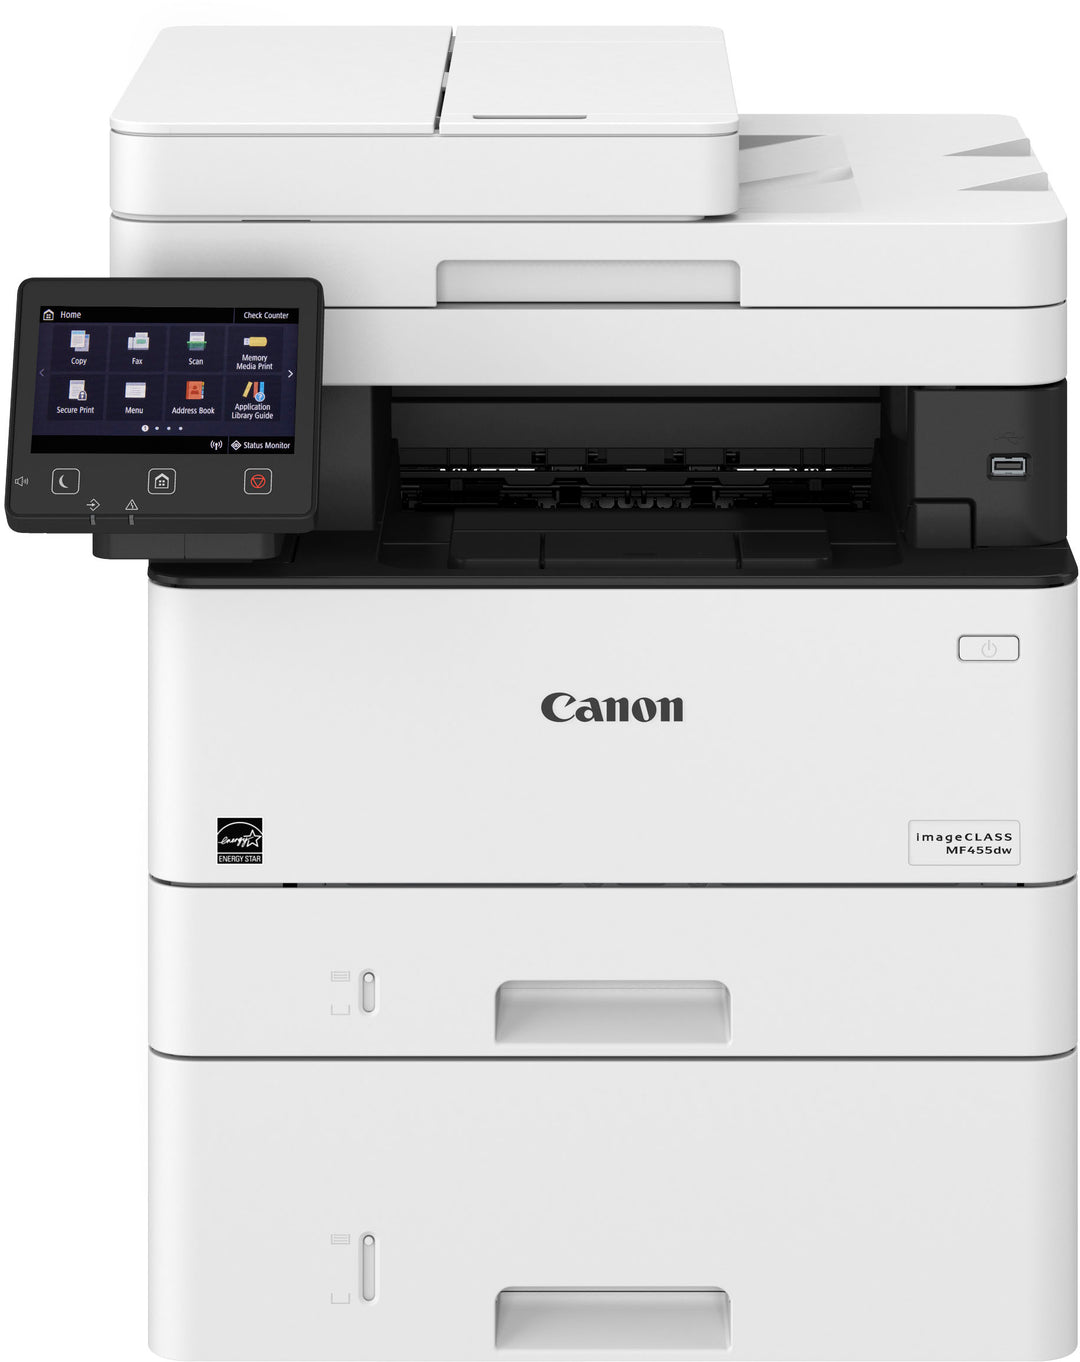 Canon - imageCLASS MF455dw Wireless Black-and-White All-In-One Laser Printer with Fax - White_4